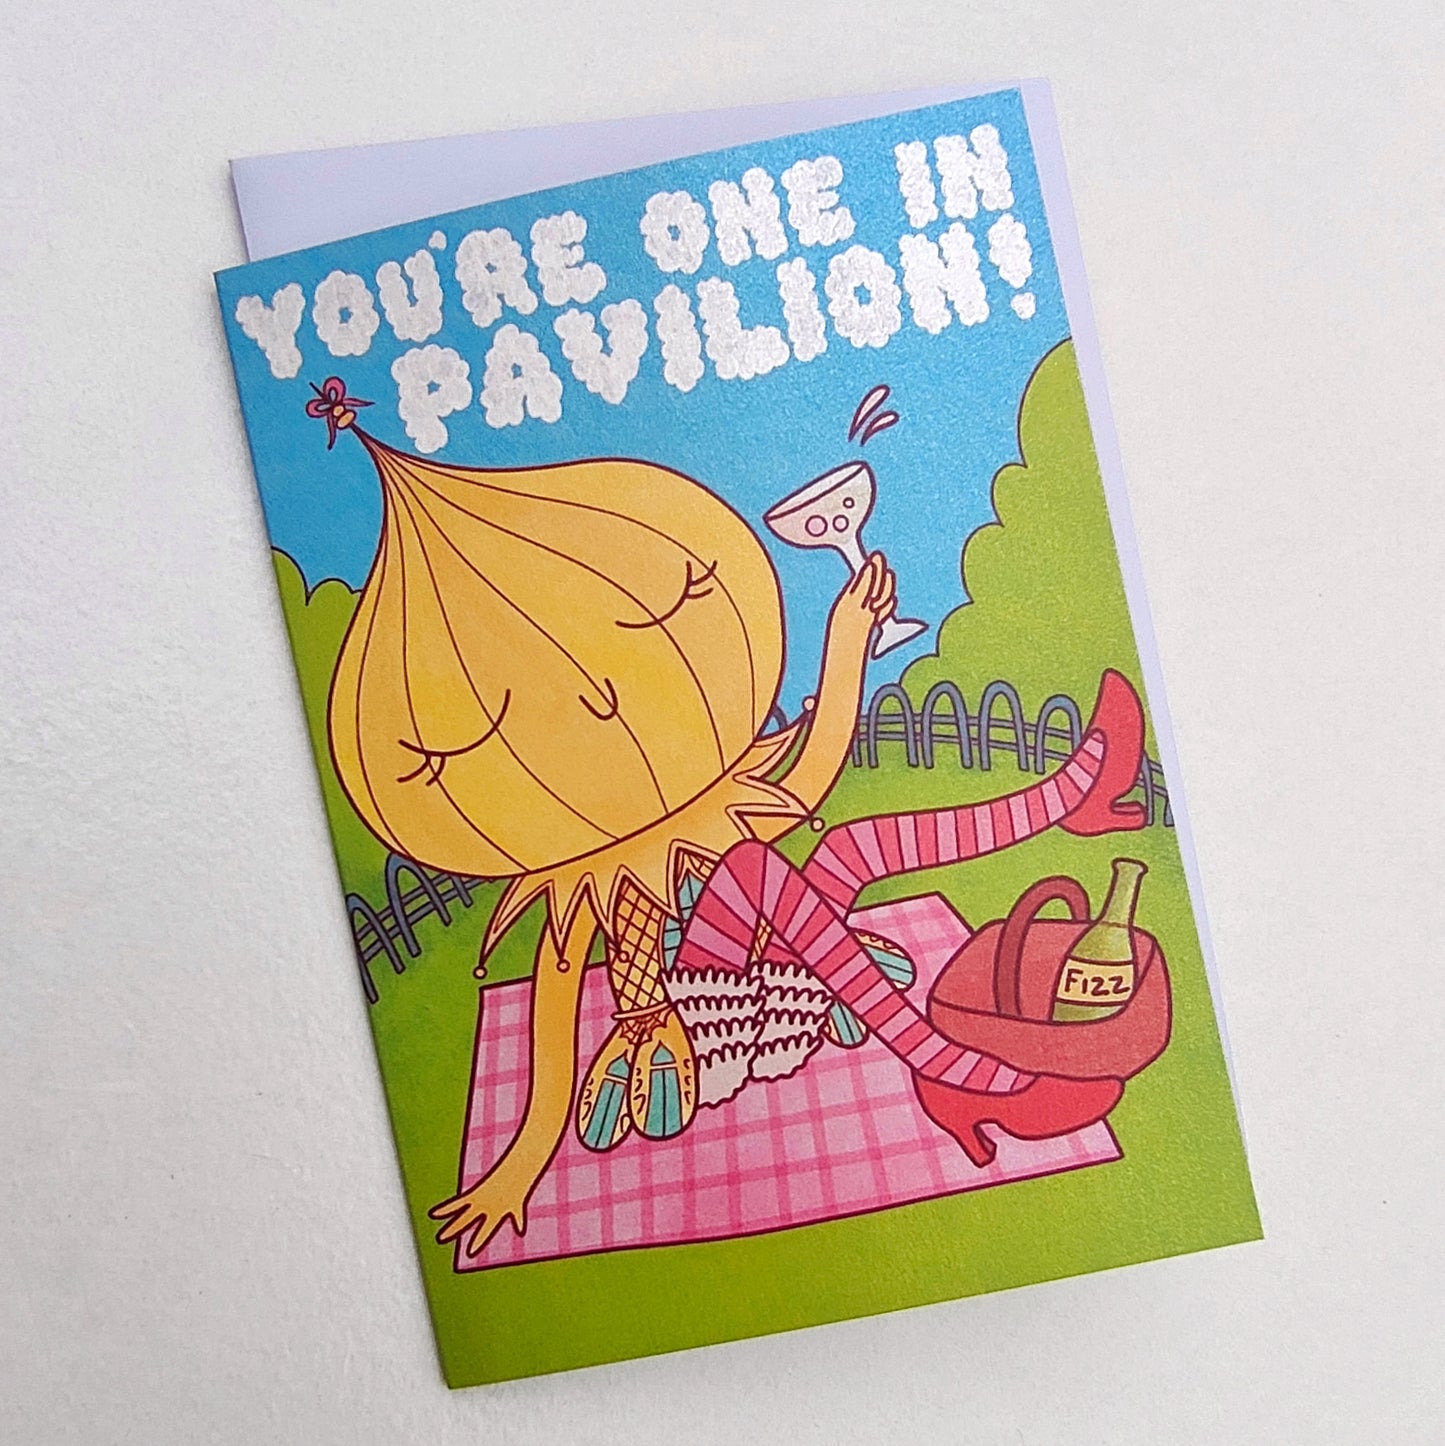 One in Pavilion Brighton Valentines Day Greetings Card